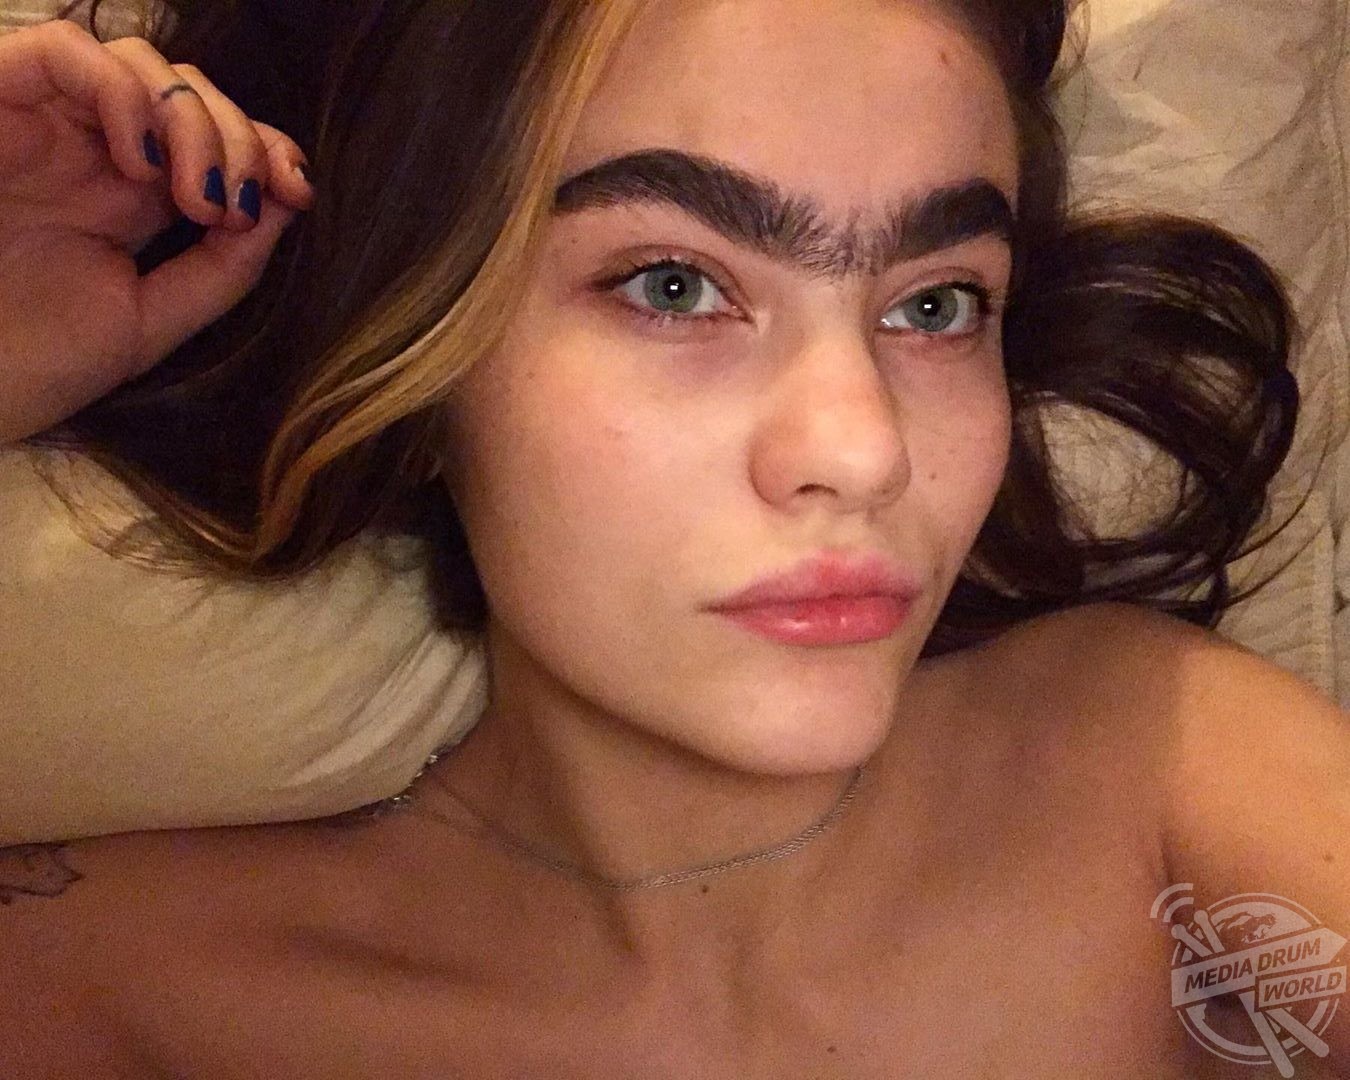 This Woman’s Unibrow Got Her A Modelling Gig And Tonnes Of DMs 